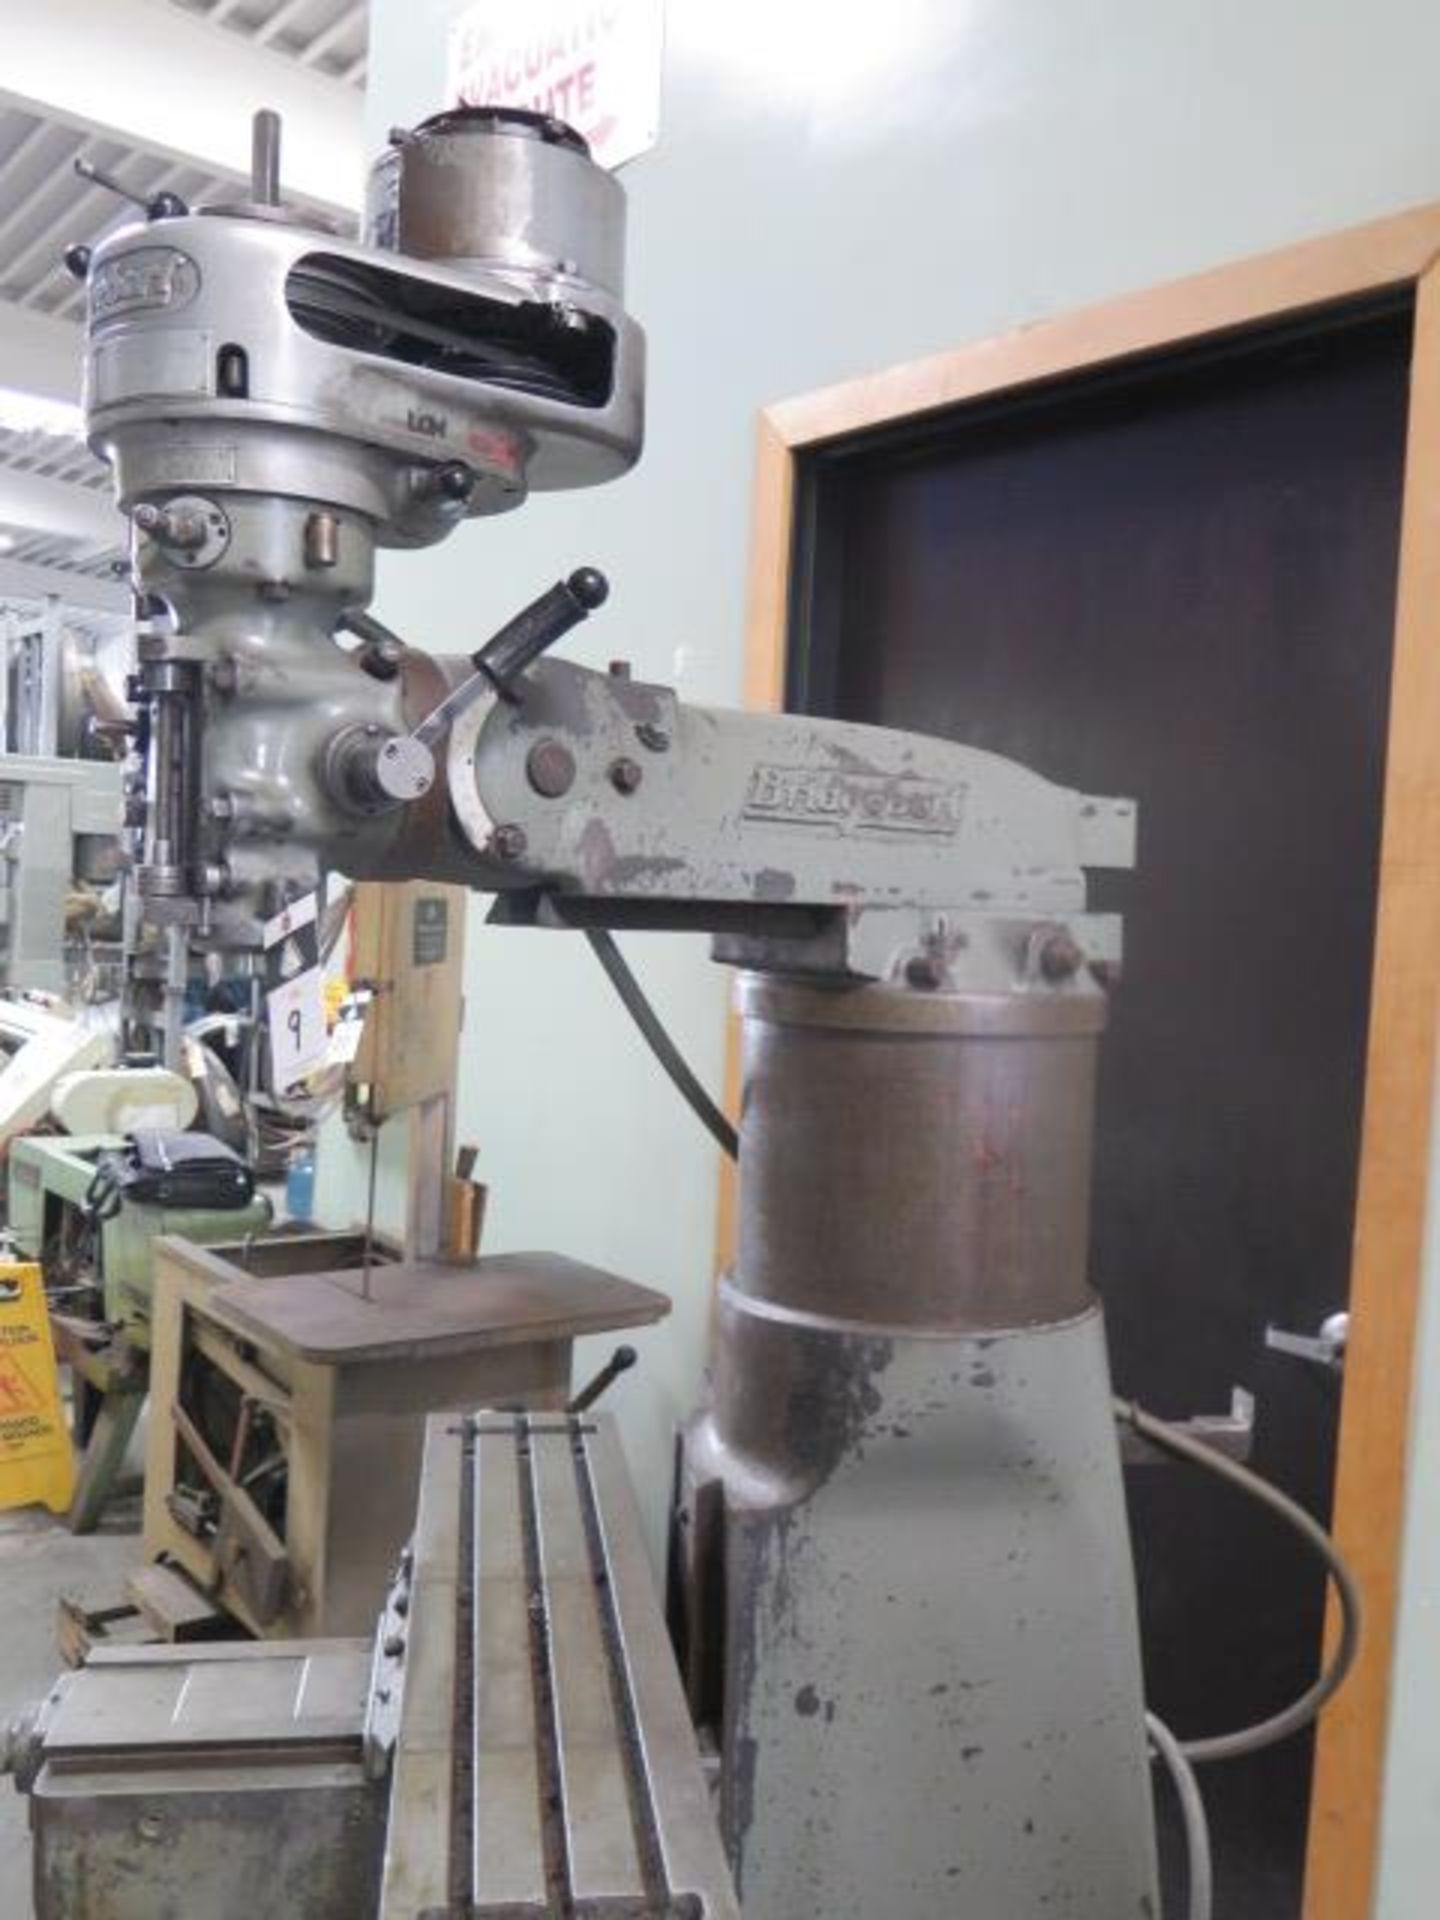 Bridgeport Vertical Mill w/ 1Hp Motor, 80-2720 RPM, 8-Speeds, 11” Riser, 9” x 42” Table SOLD AS IS - Image 6 of 11